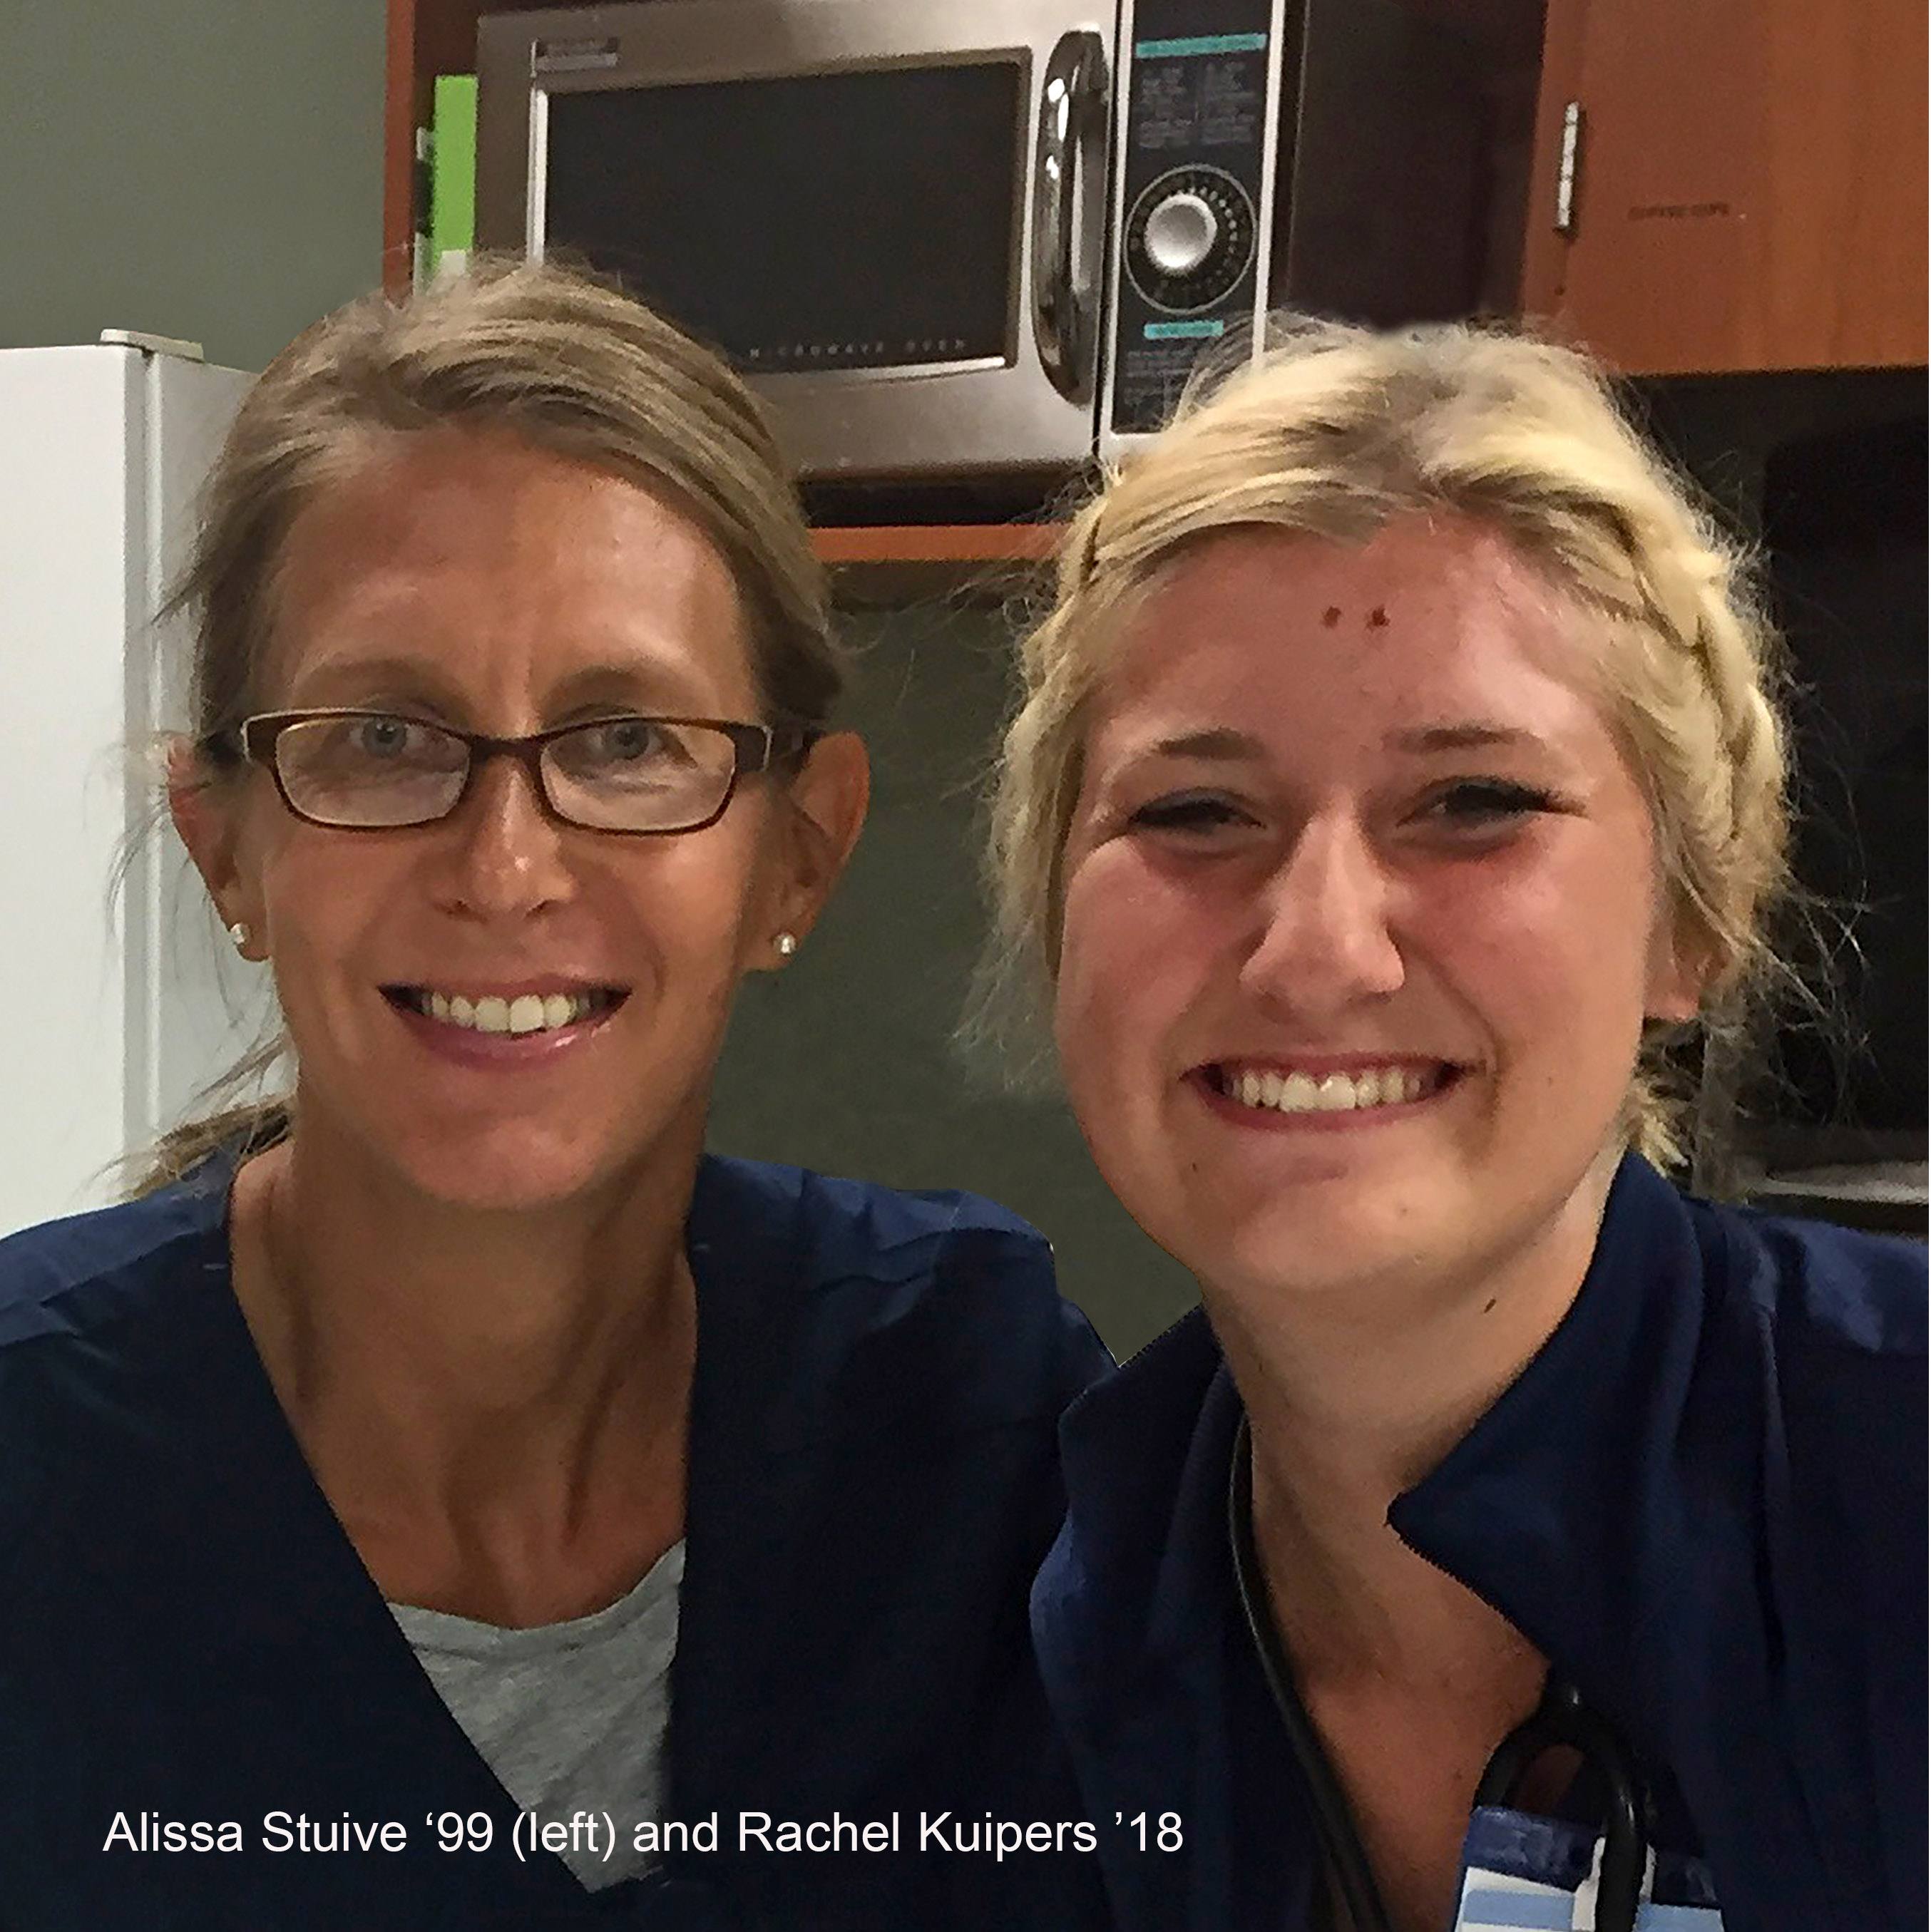 With the help of the Trinity Alumni Nursing Association, Rachel Kuipers '18 landed her first job in her chosen area.